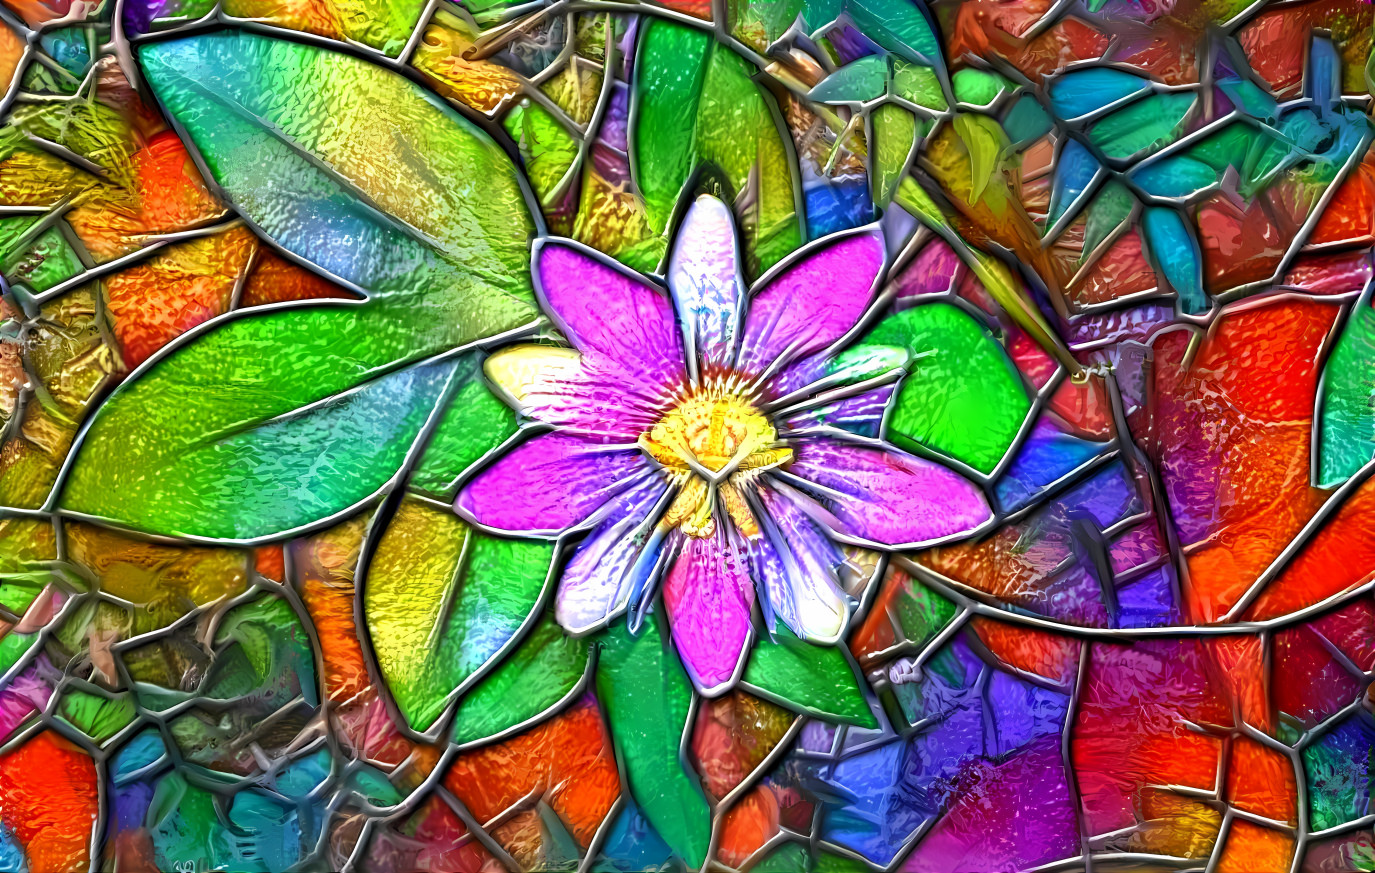 Stained glass passionflower